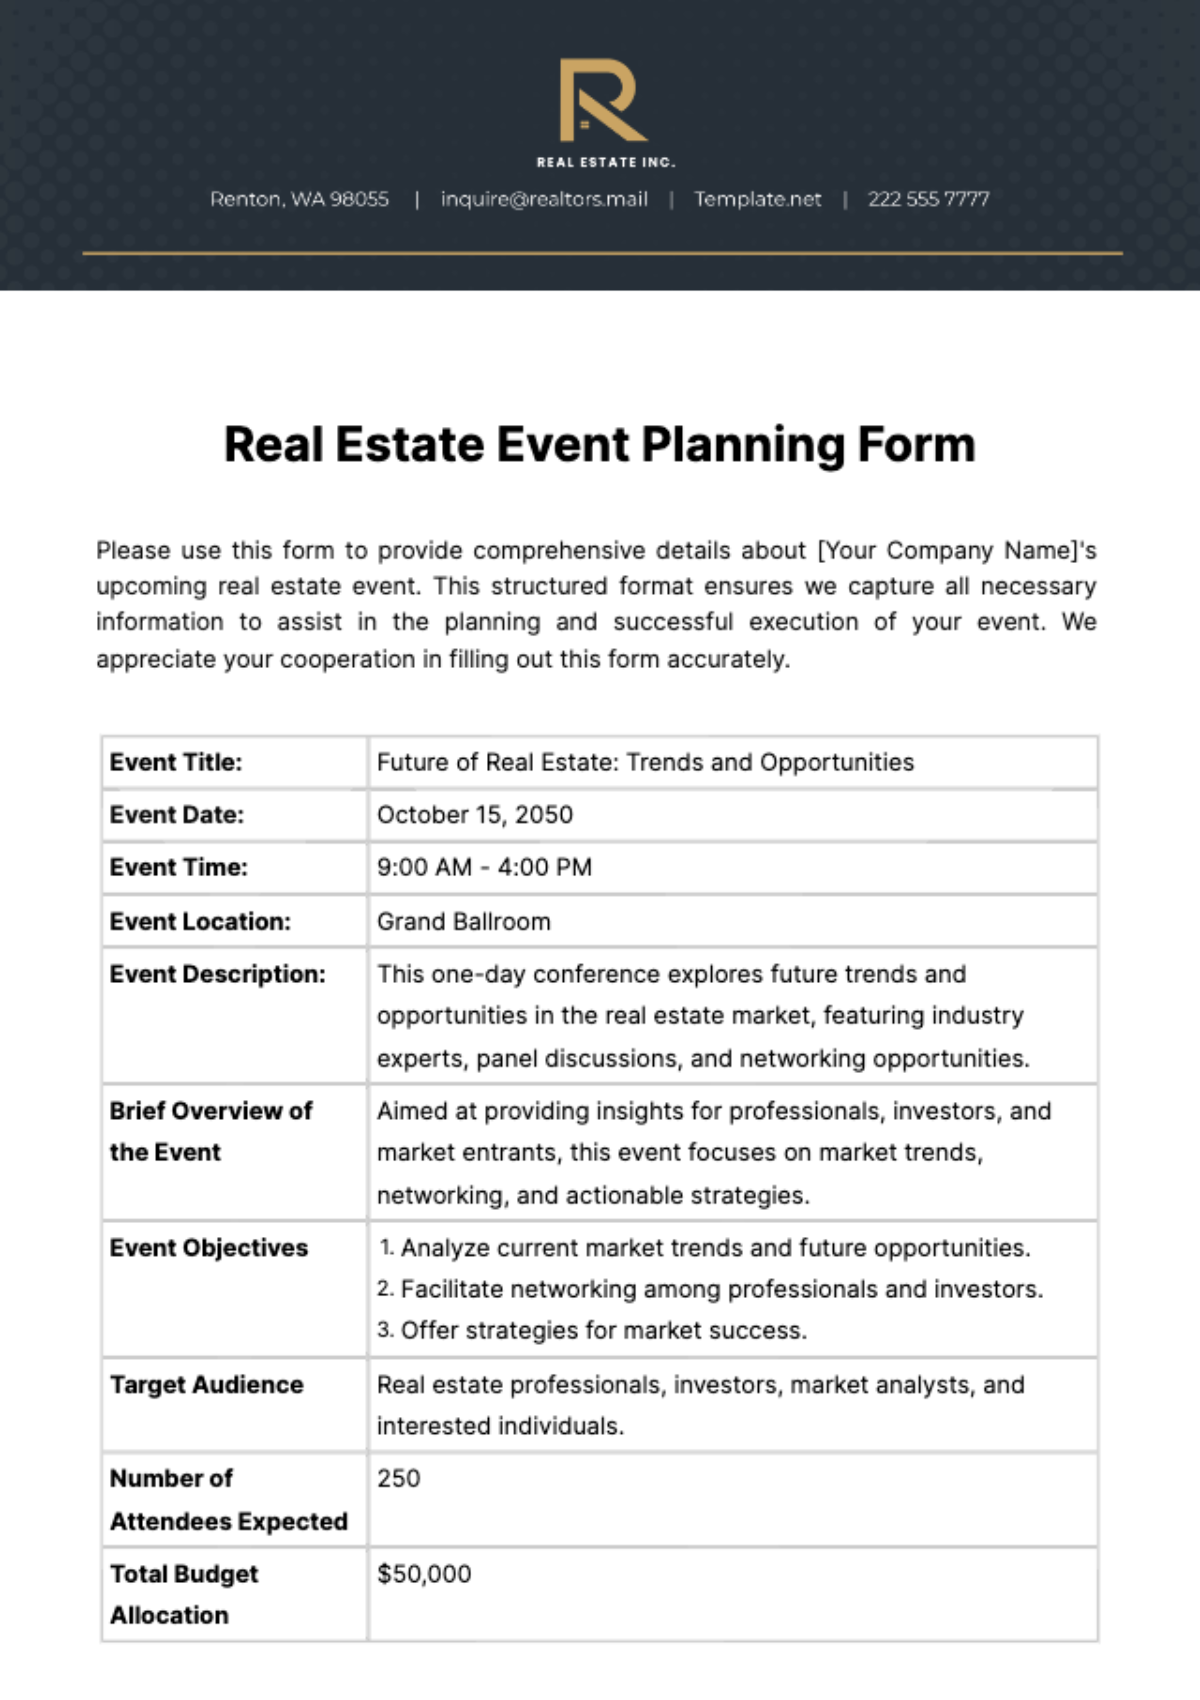 Real Estate Event Planning Form Template